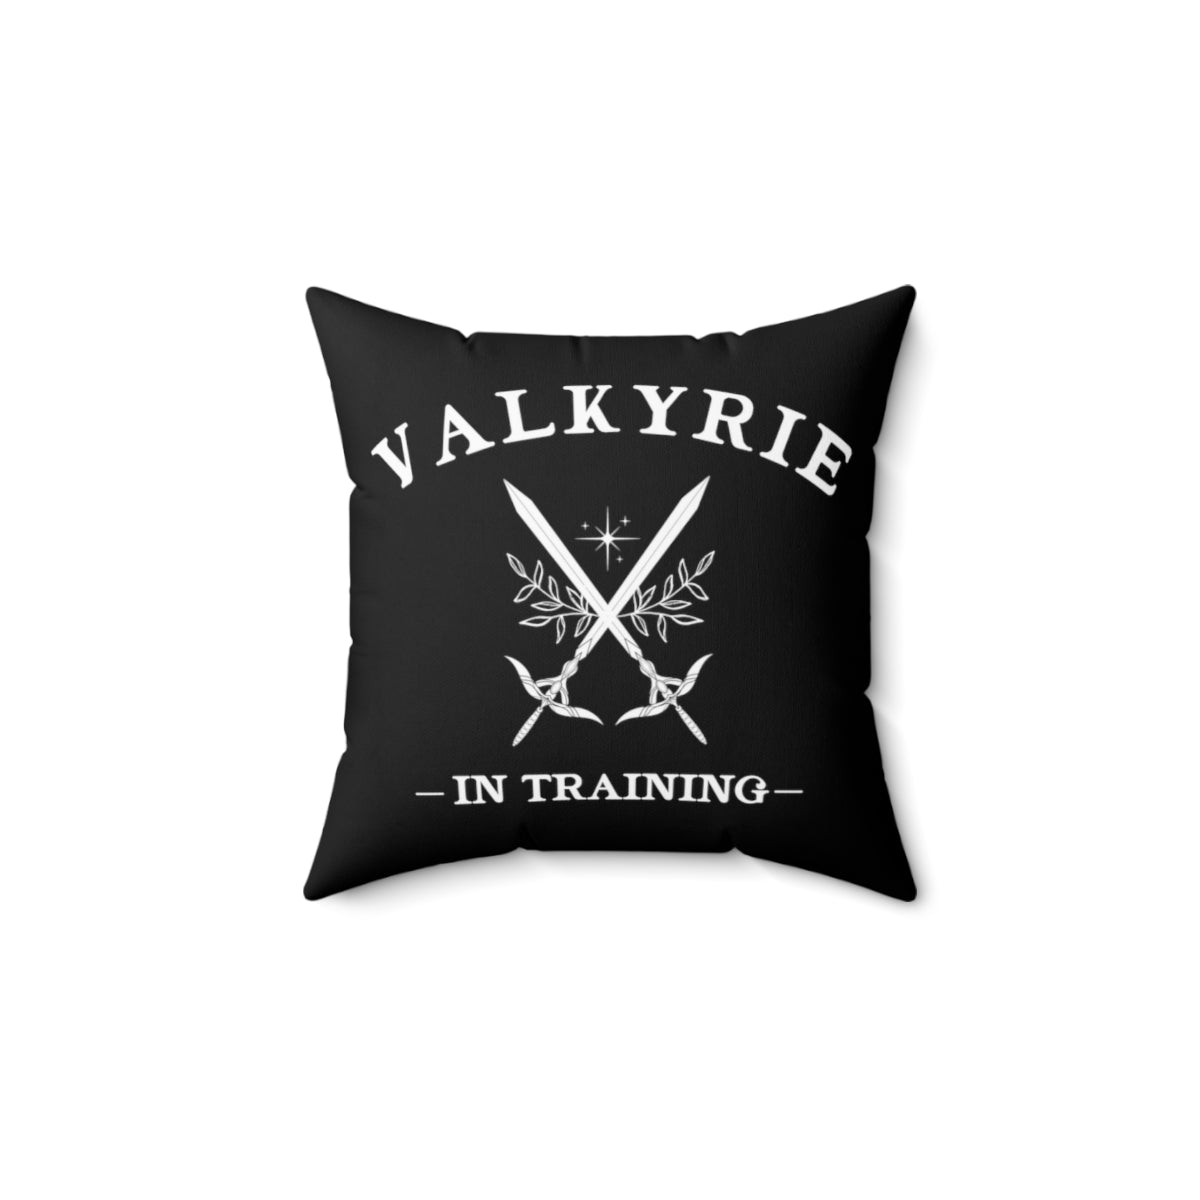 Valkyrie Pillow Case